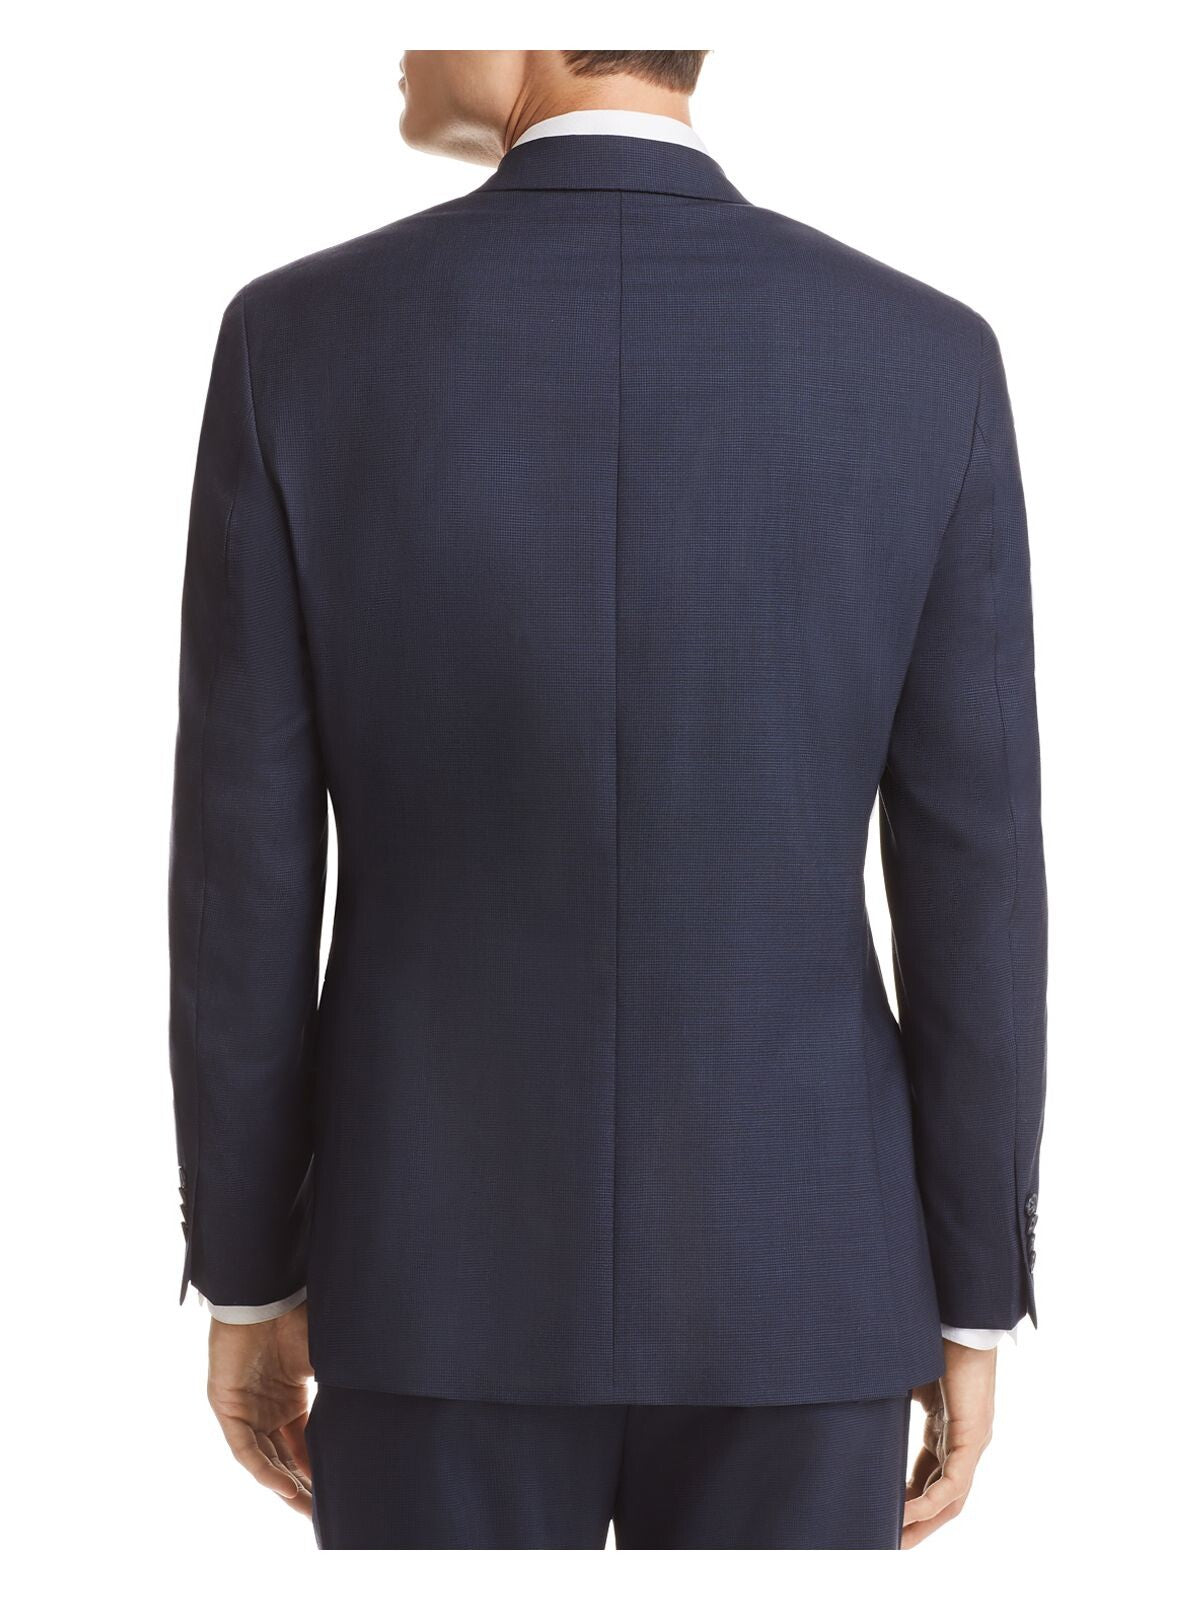 MICHAEL KORS Mens Navy Single Breasted, Stretch, Classic Fit Wool Blend Suit Separate Blazer Jacket 38R